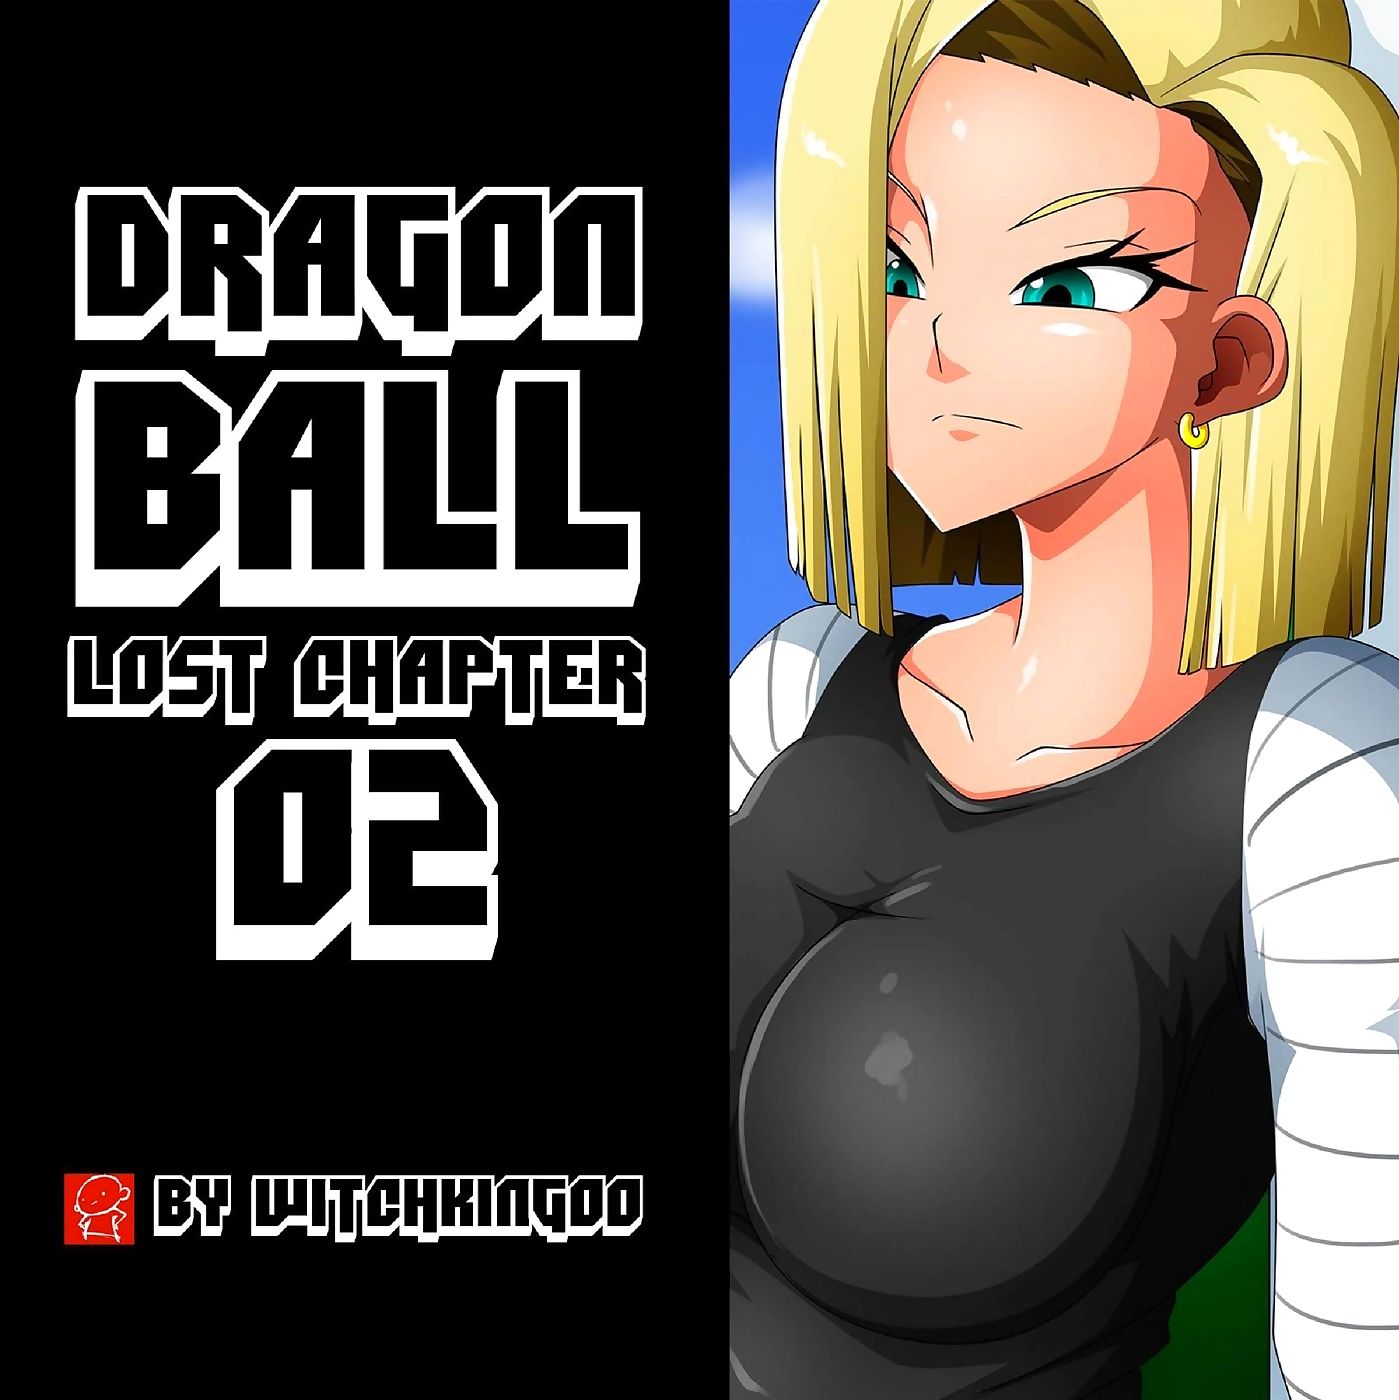 DragonBall Lost Chapter 02- Witchking00 page 1